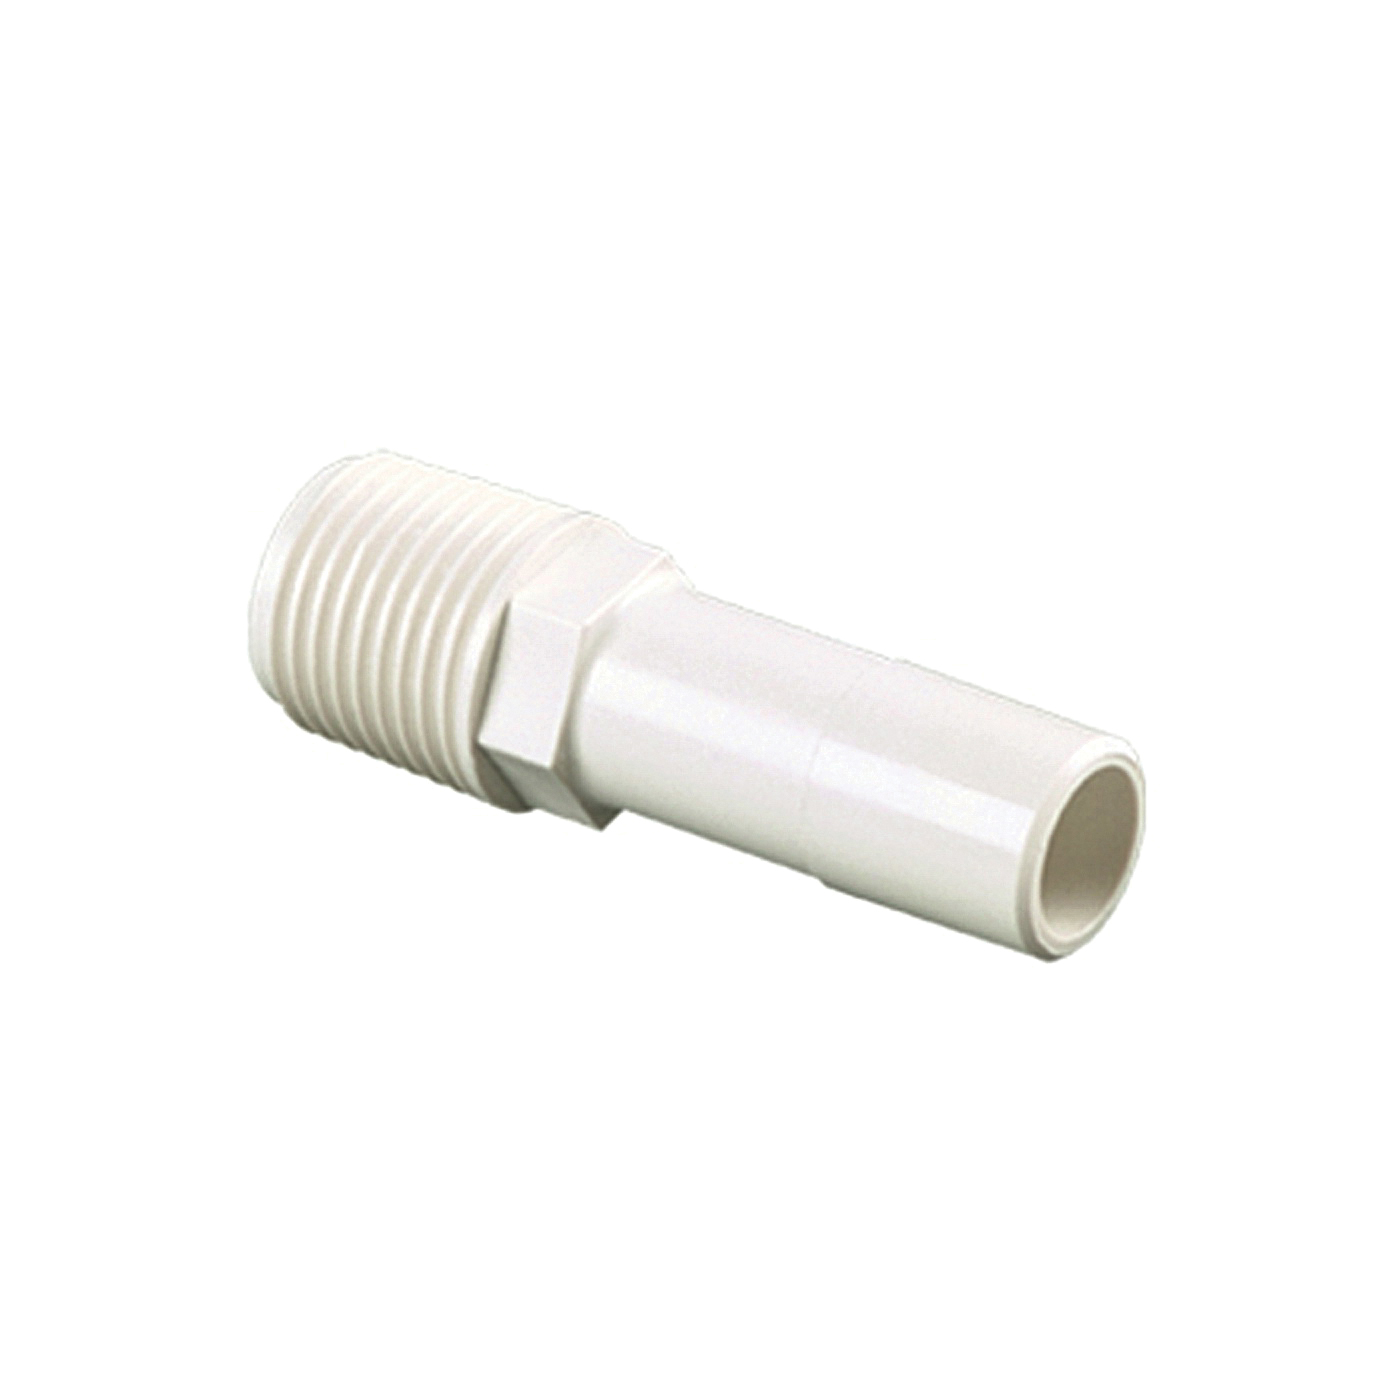 Watts 35 Series 3527-1008 Stem Connector, 1/2 in, CTS x MPT, Polypropylene, 250 psi Pressure, Off-White